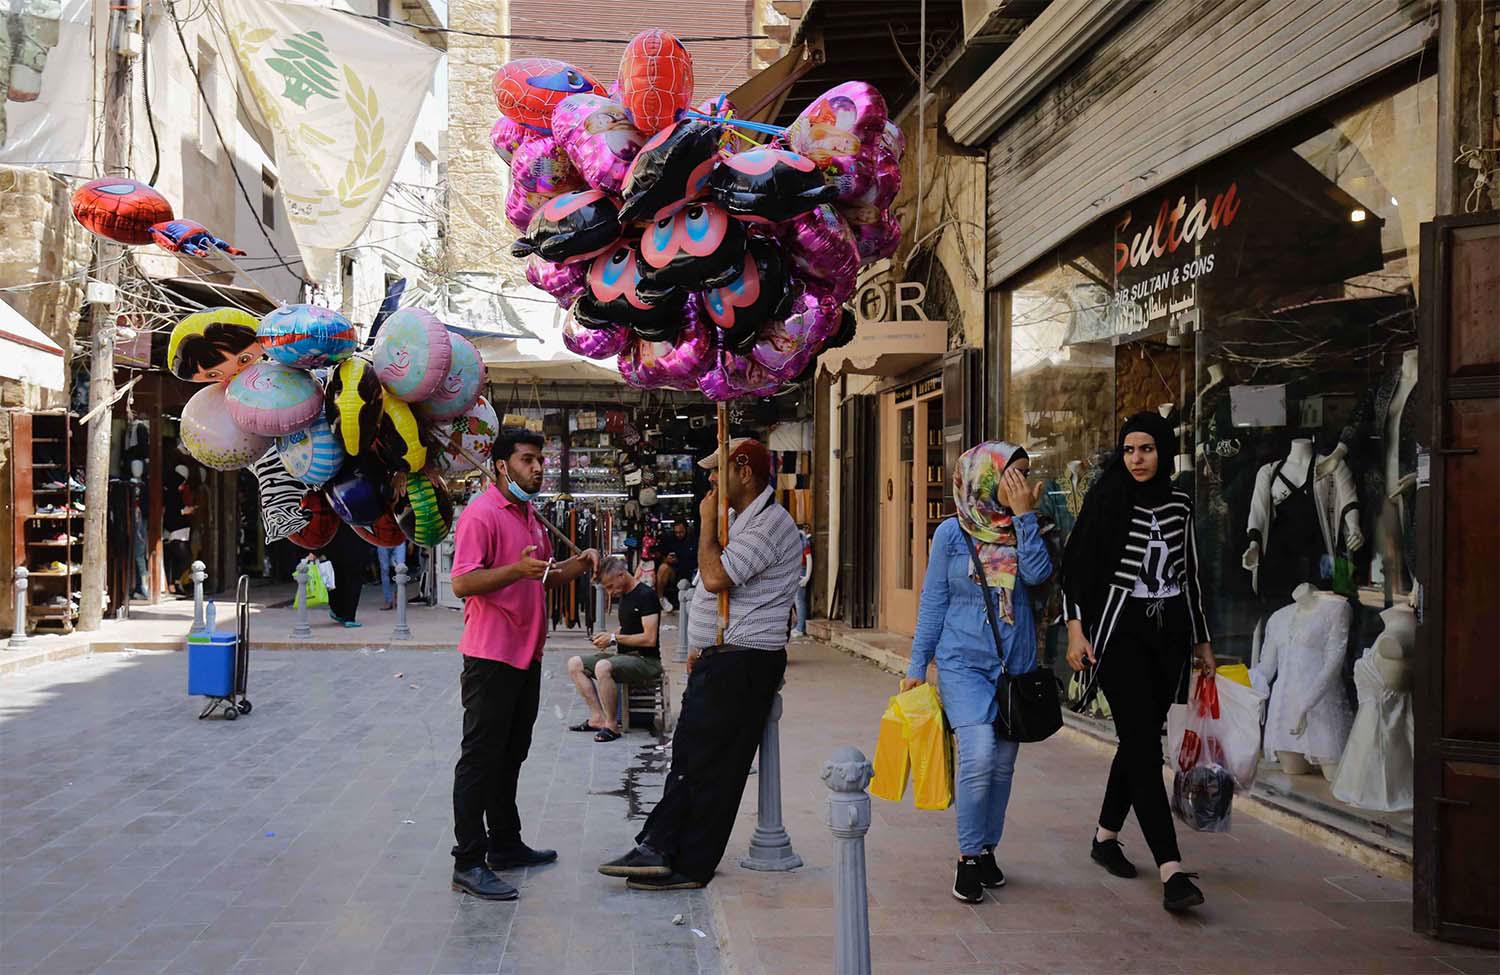 Lebanon is suffering from a dangerous depletion of resources, including human capital